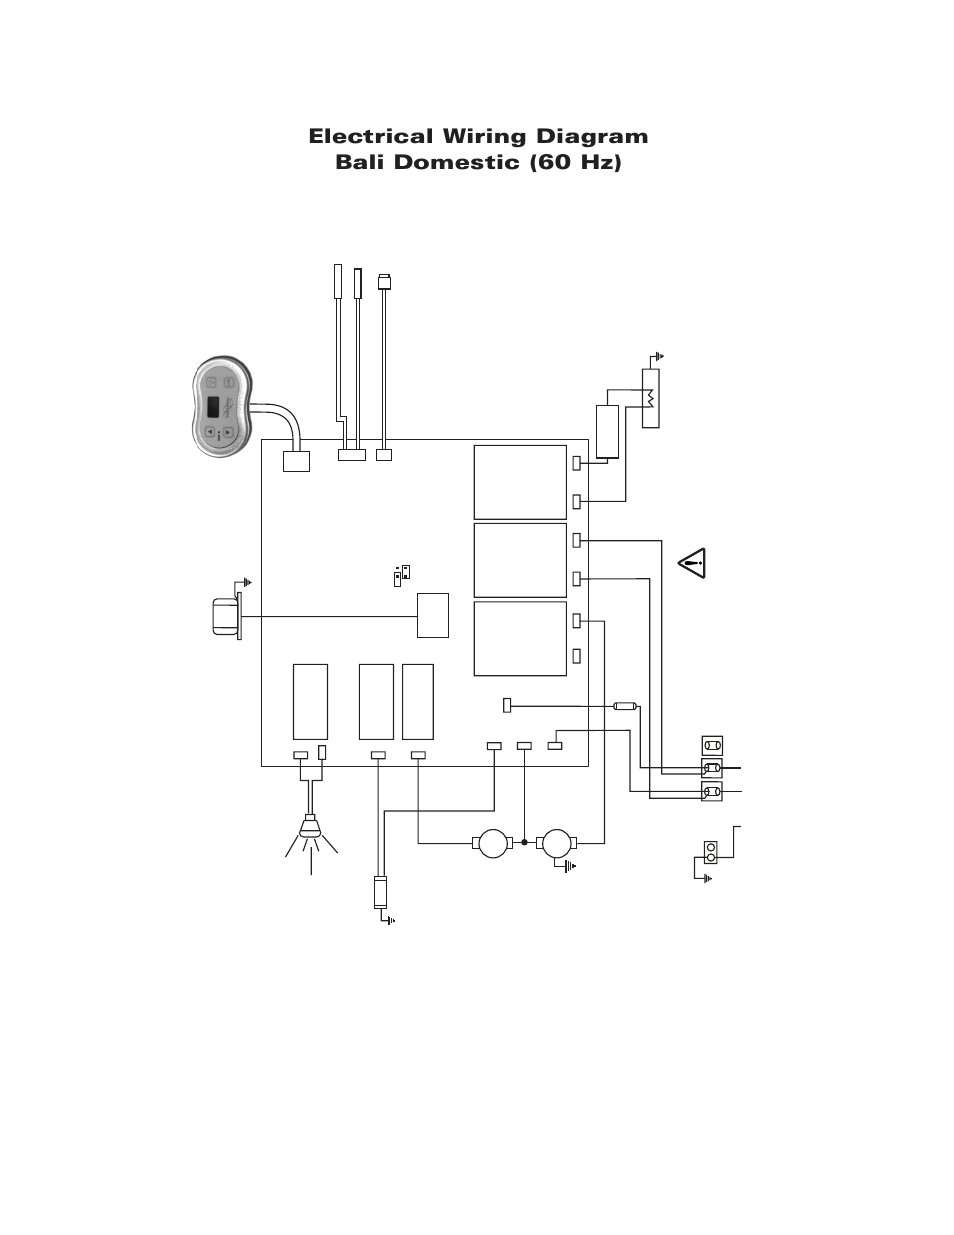 Electrical wiring diagrams, Bali domestic (60 hz), Wiring diagram bali domestic (60 hz) | Electrical wiring diagram bali domestic (60 hz), Page 28 | Sundance Spas Maxxus User Manual | Page 31 / 37